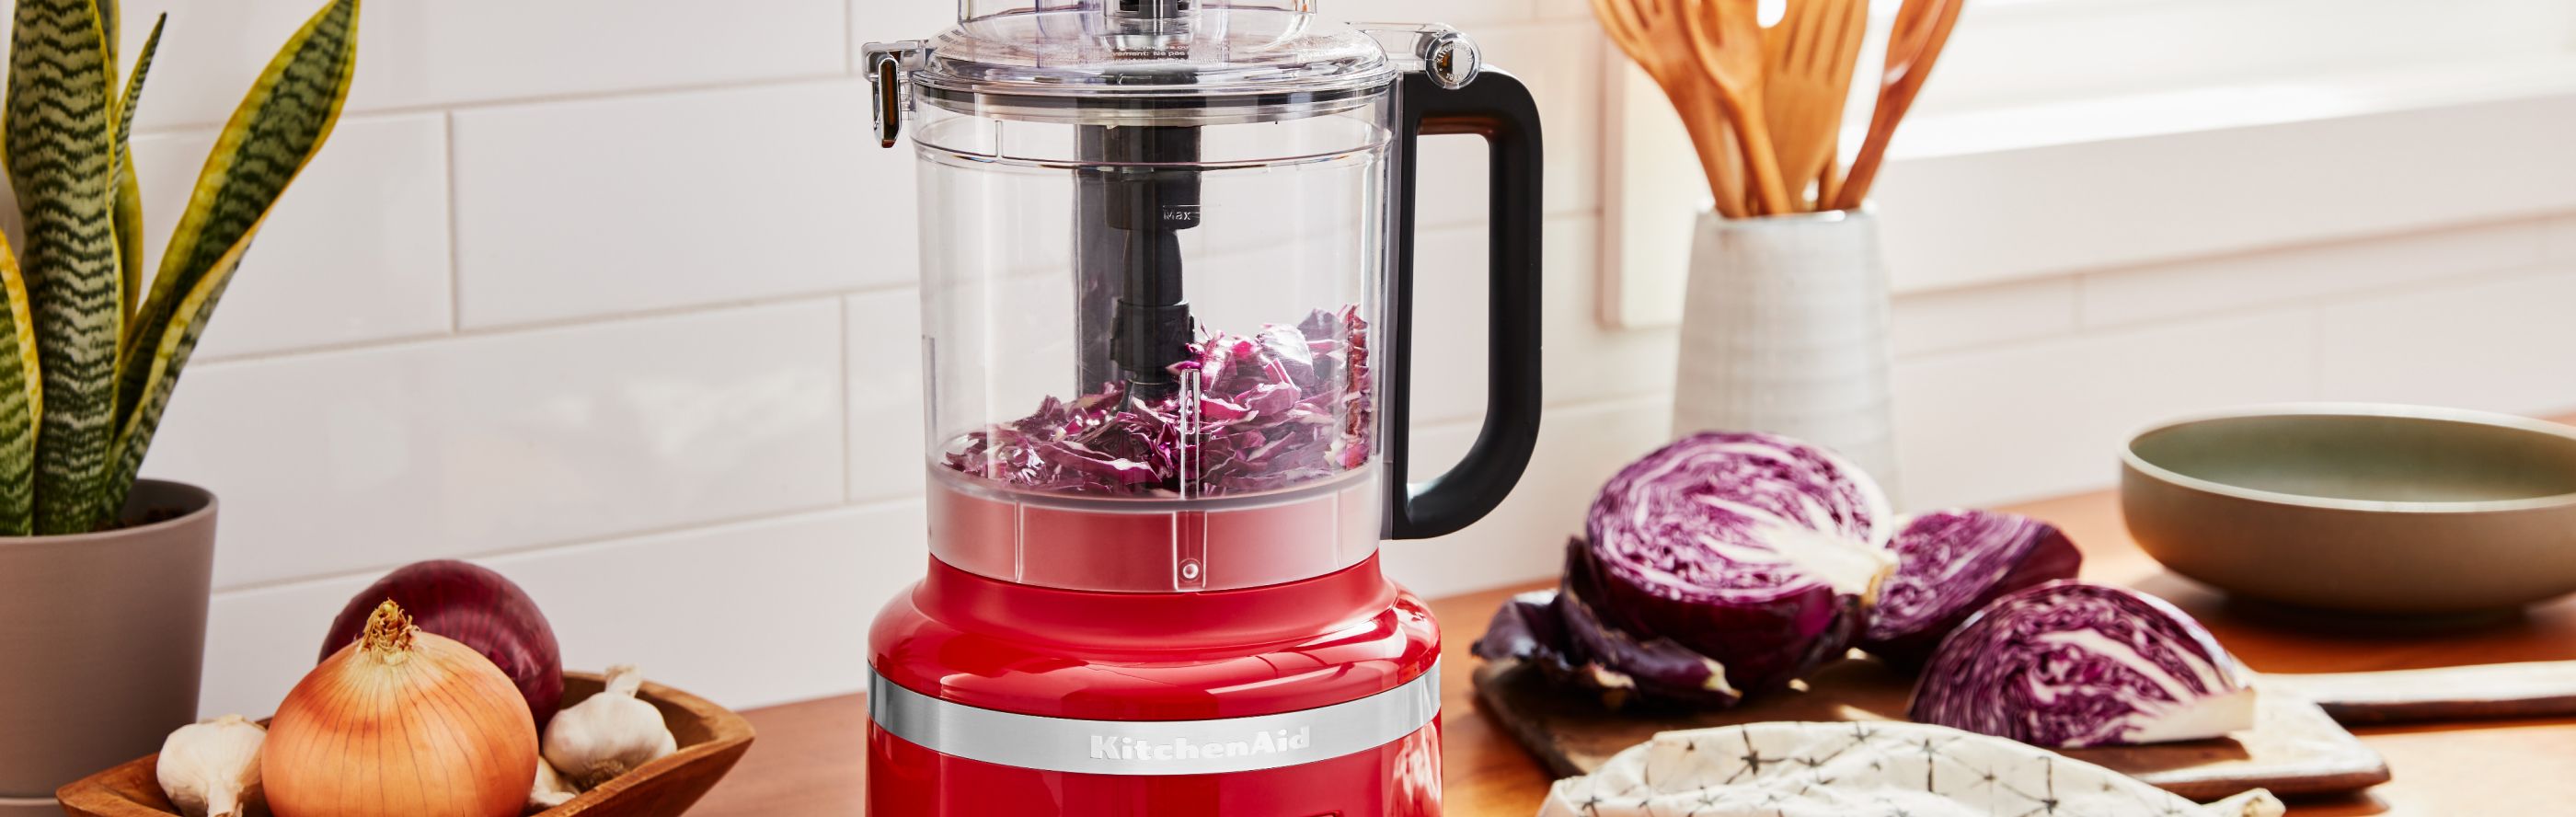 KitchenAid® food processor on a kitchen counter next to sliced purple cabbage and other vegetables